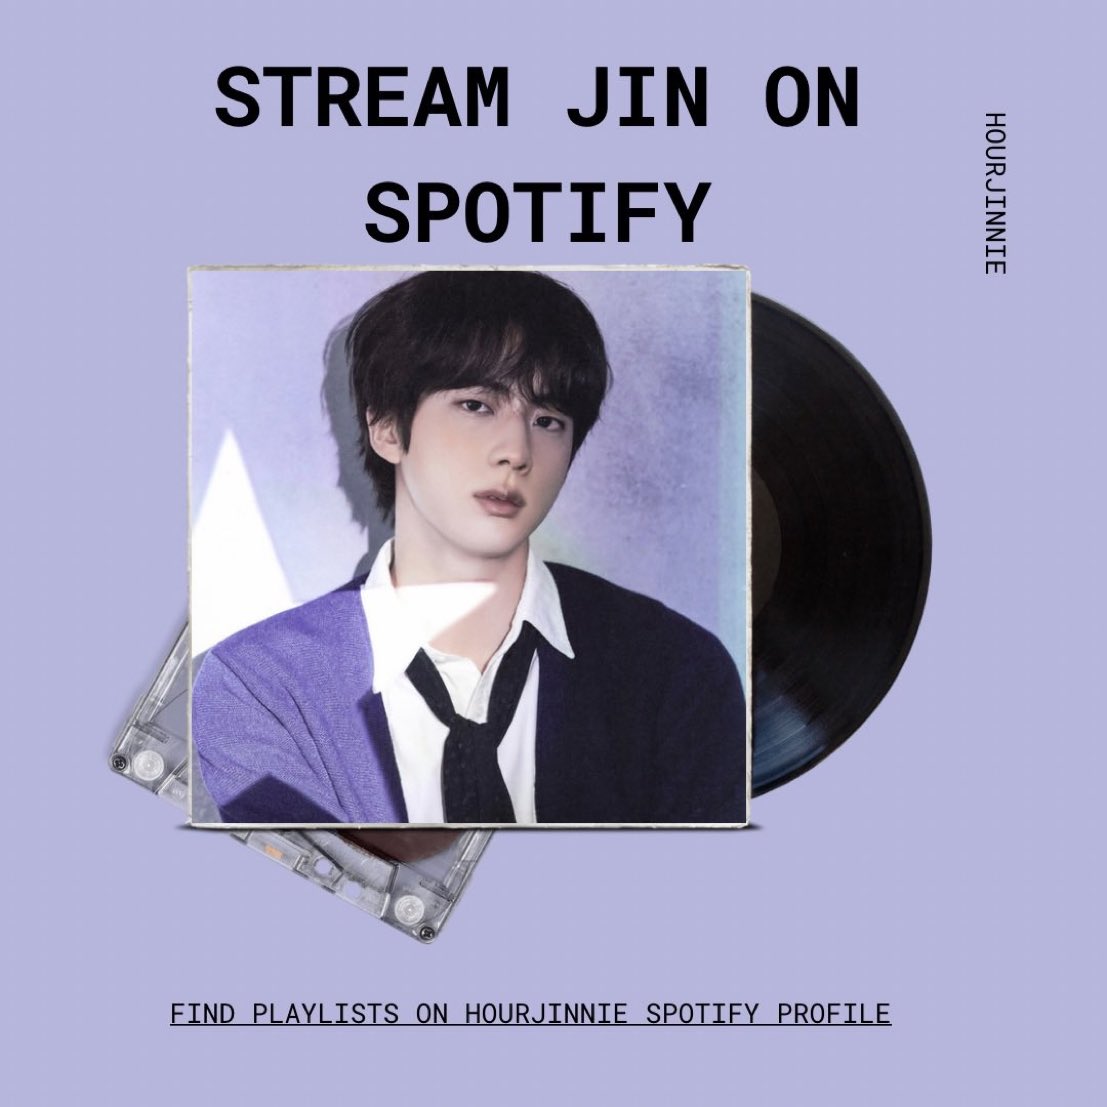 [STREAMING: SPOTIFY] Checking in: who is streaming #JinTo1B ? - stream every song under his Spotify profile • TASK • Leave a screenshot from Spotify streaming below 👇🏼 Goal: 50 SS before 11:59 PM KST • open.spotify.com/playlist/6yfOd…